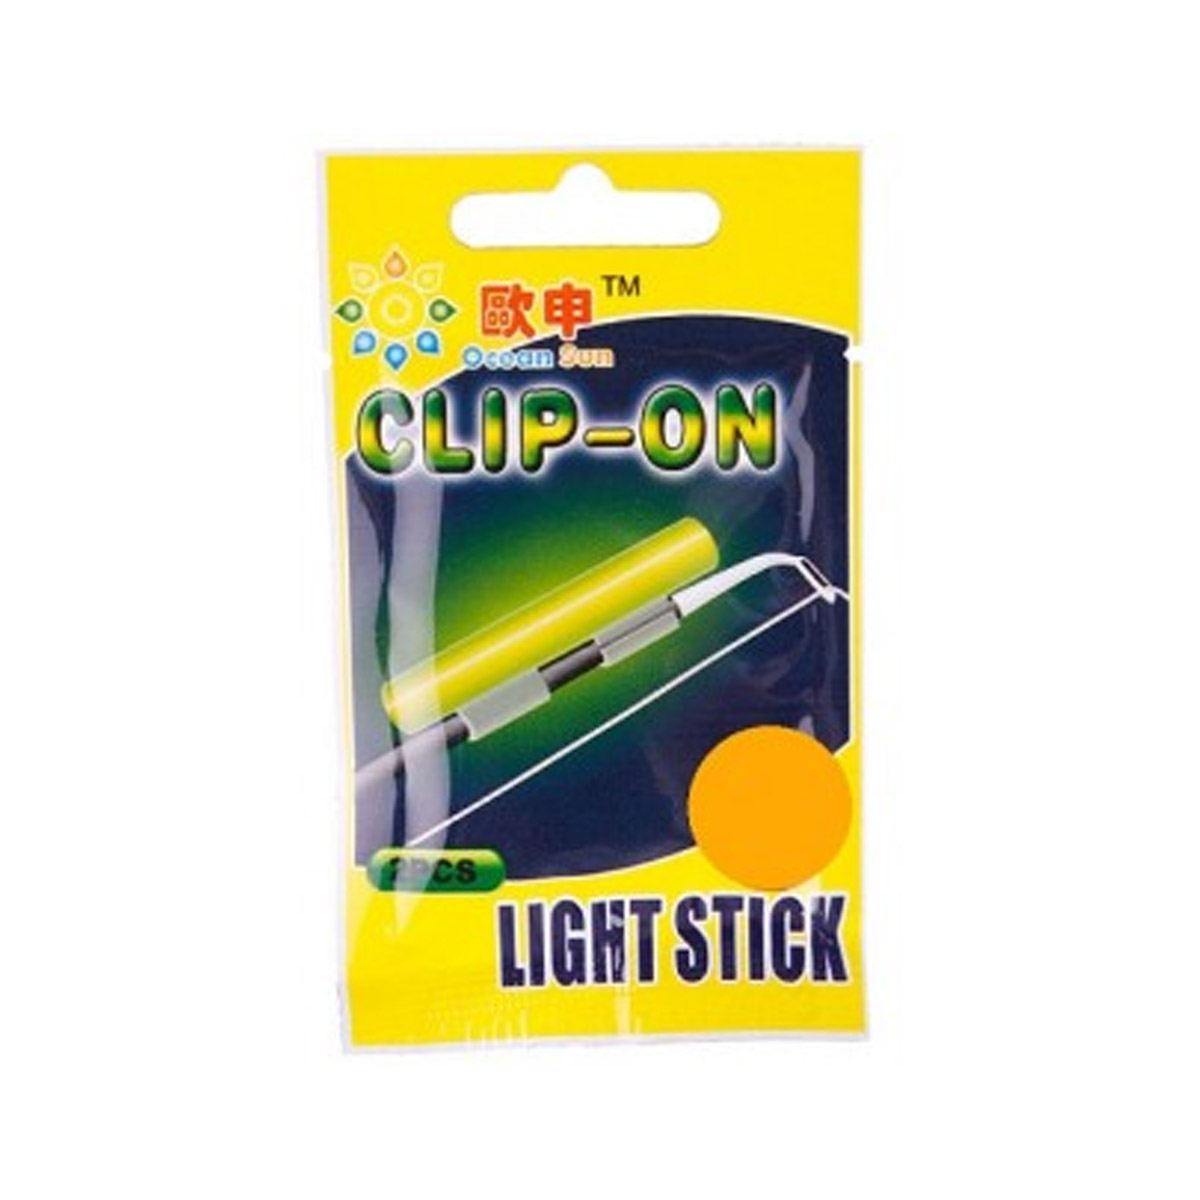 Chemical Clip On Powerlight 1.5 tot 1.9mm